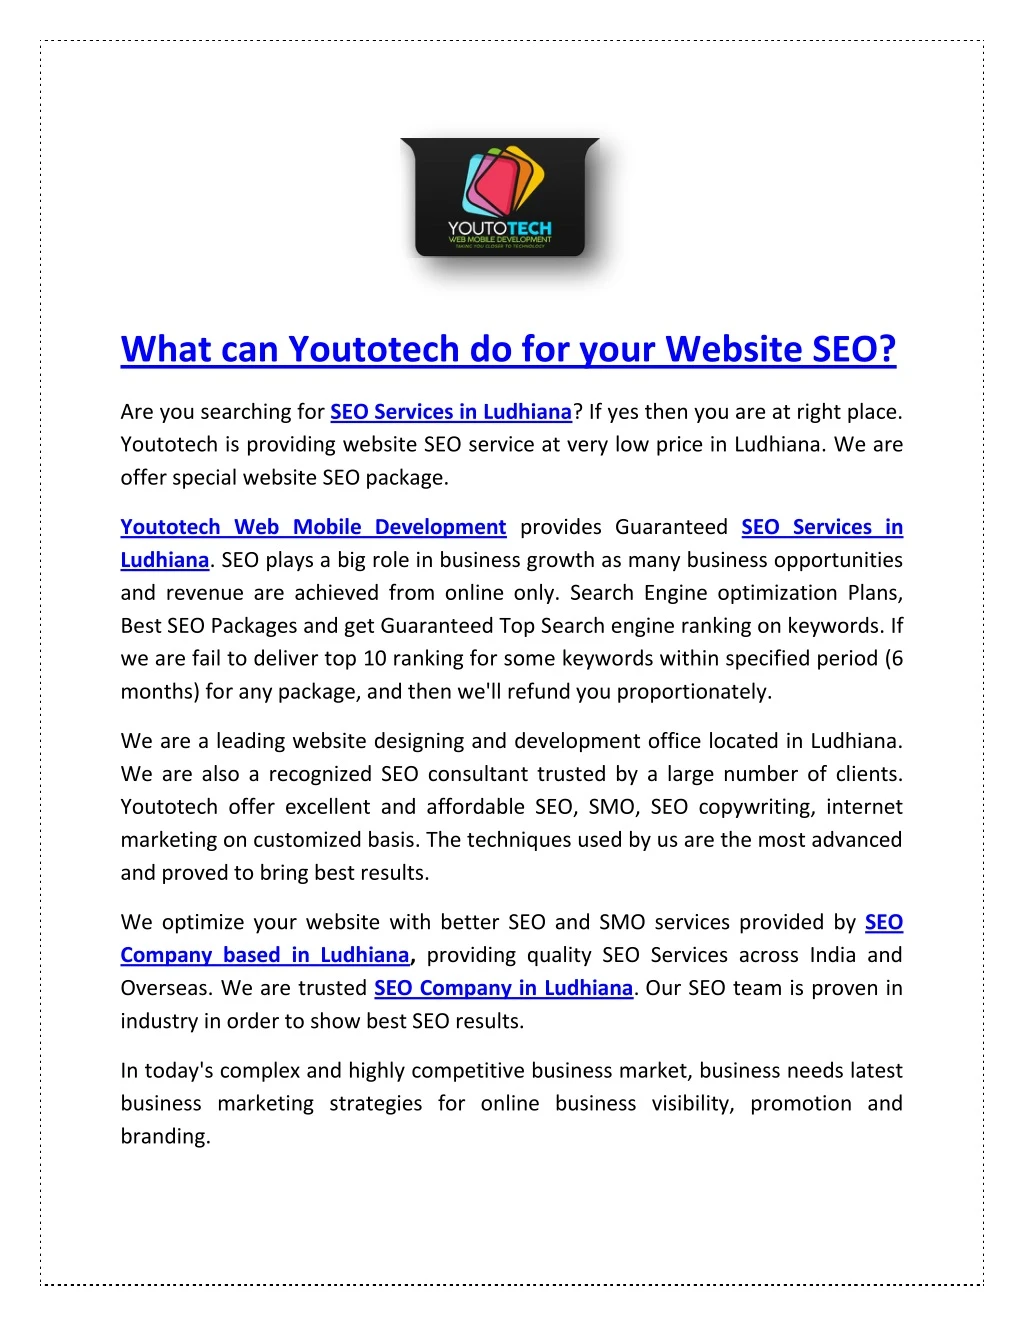 what can youtotech do for your website seo